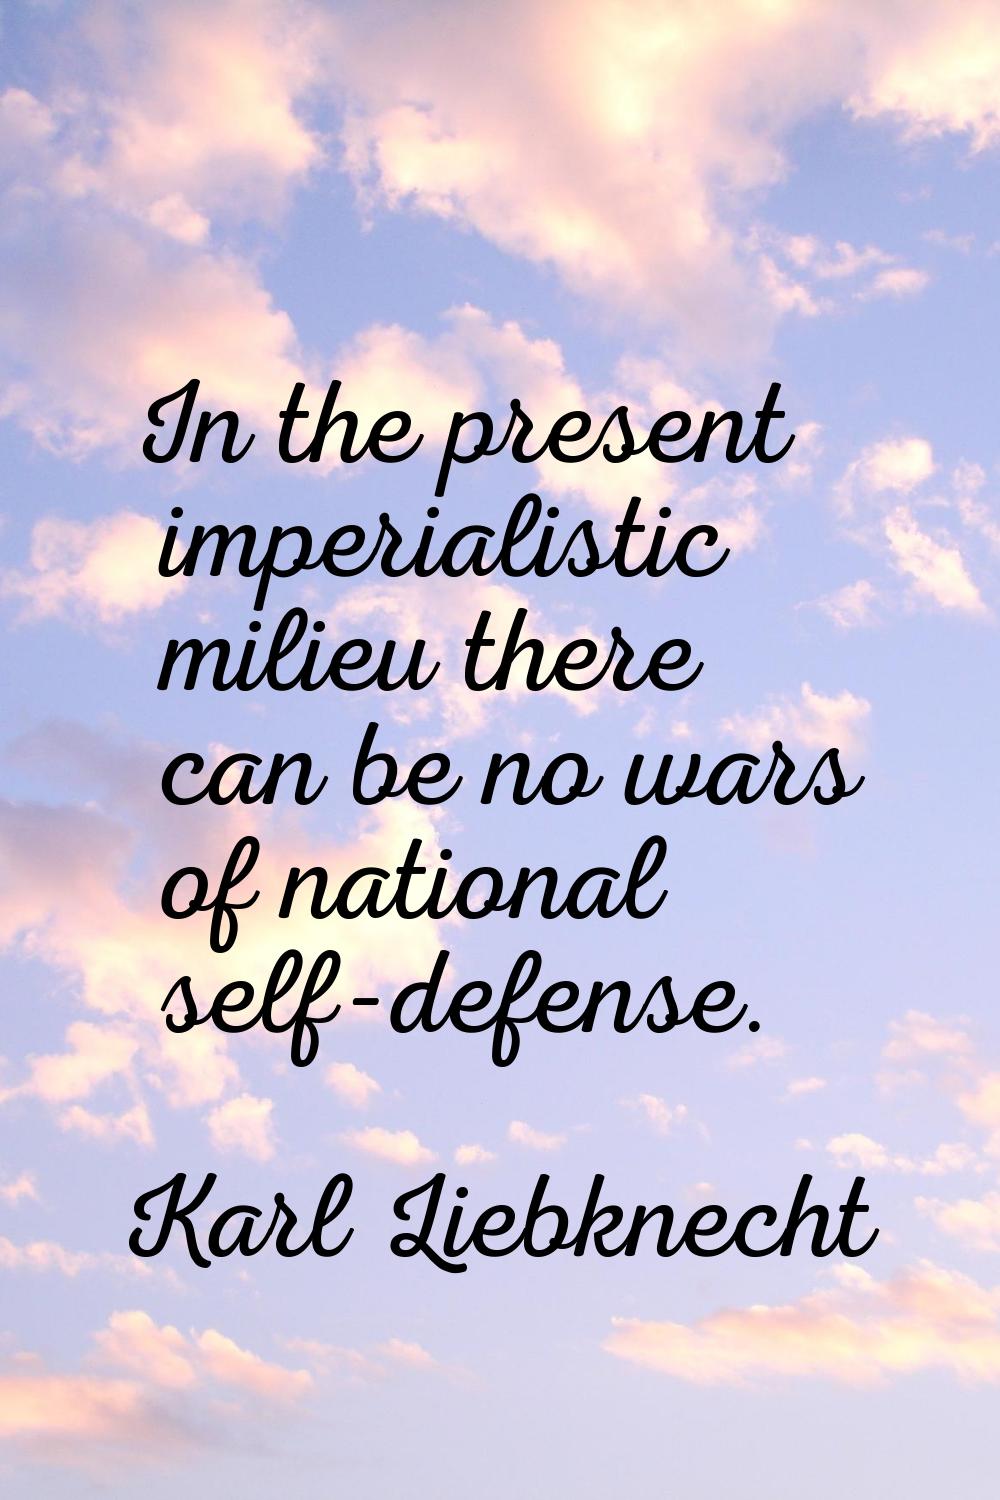 In the present imperialistic milieu there can be no wars of national self-defense.